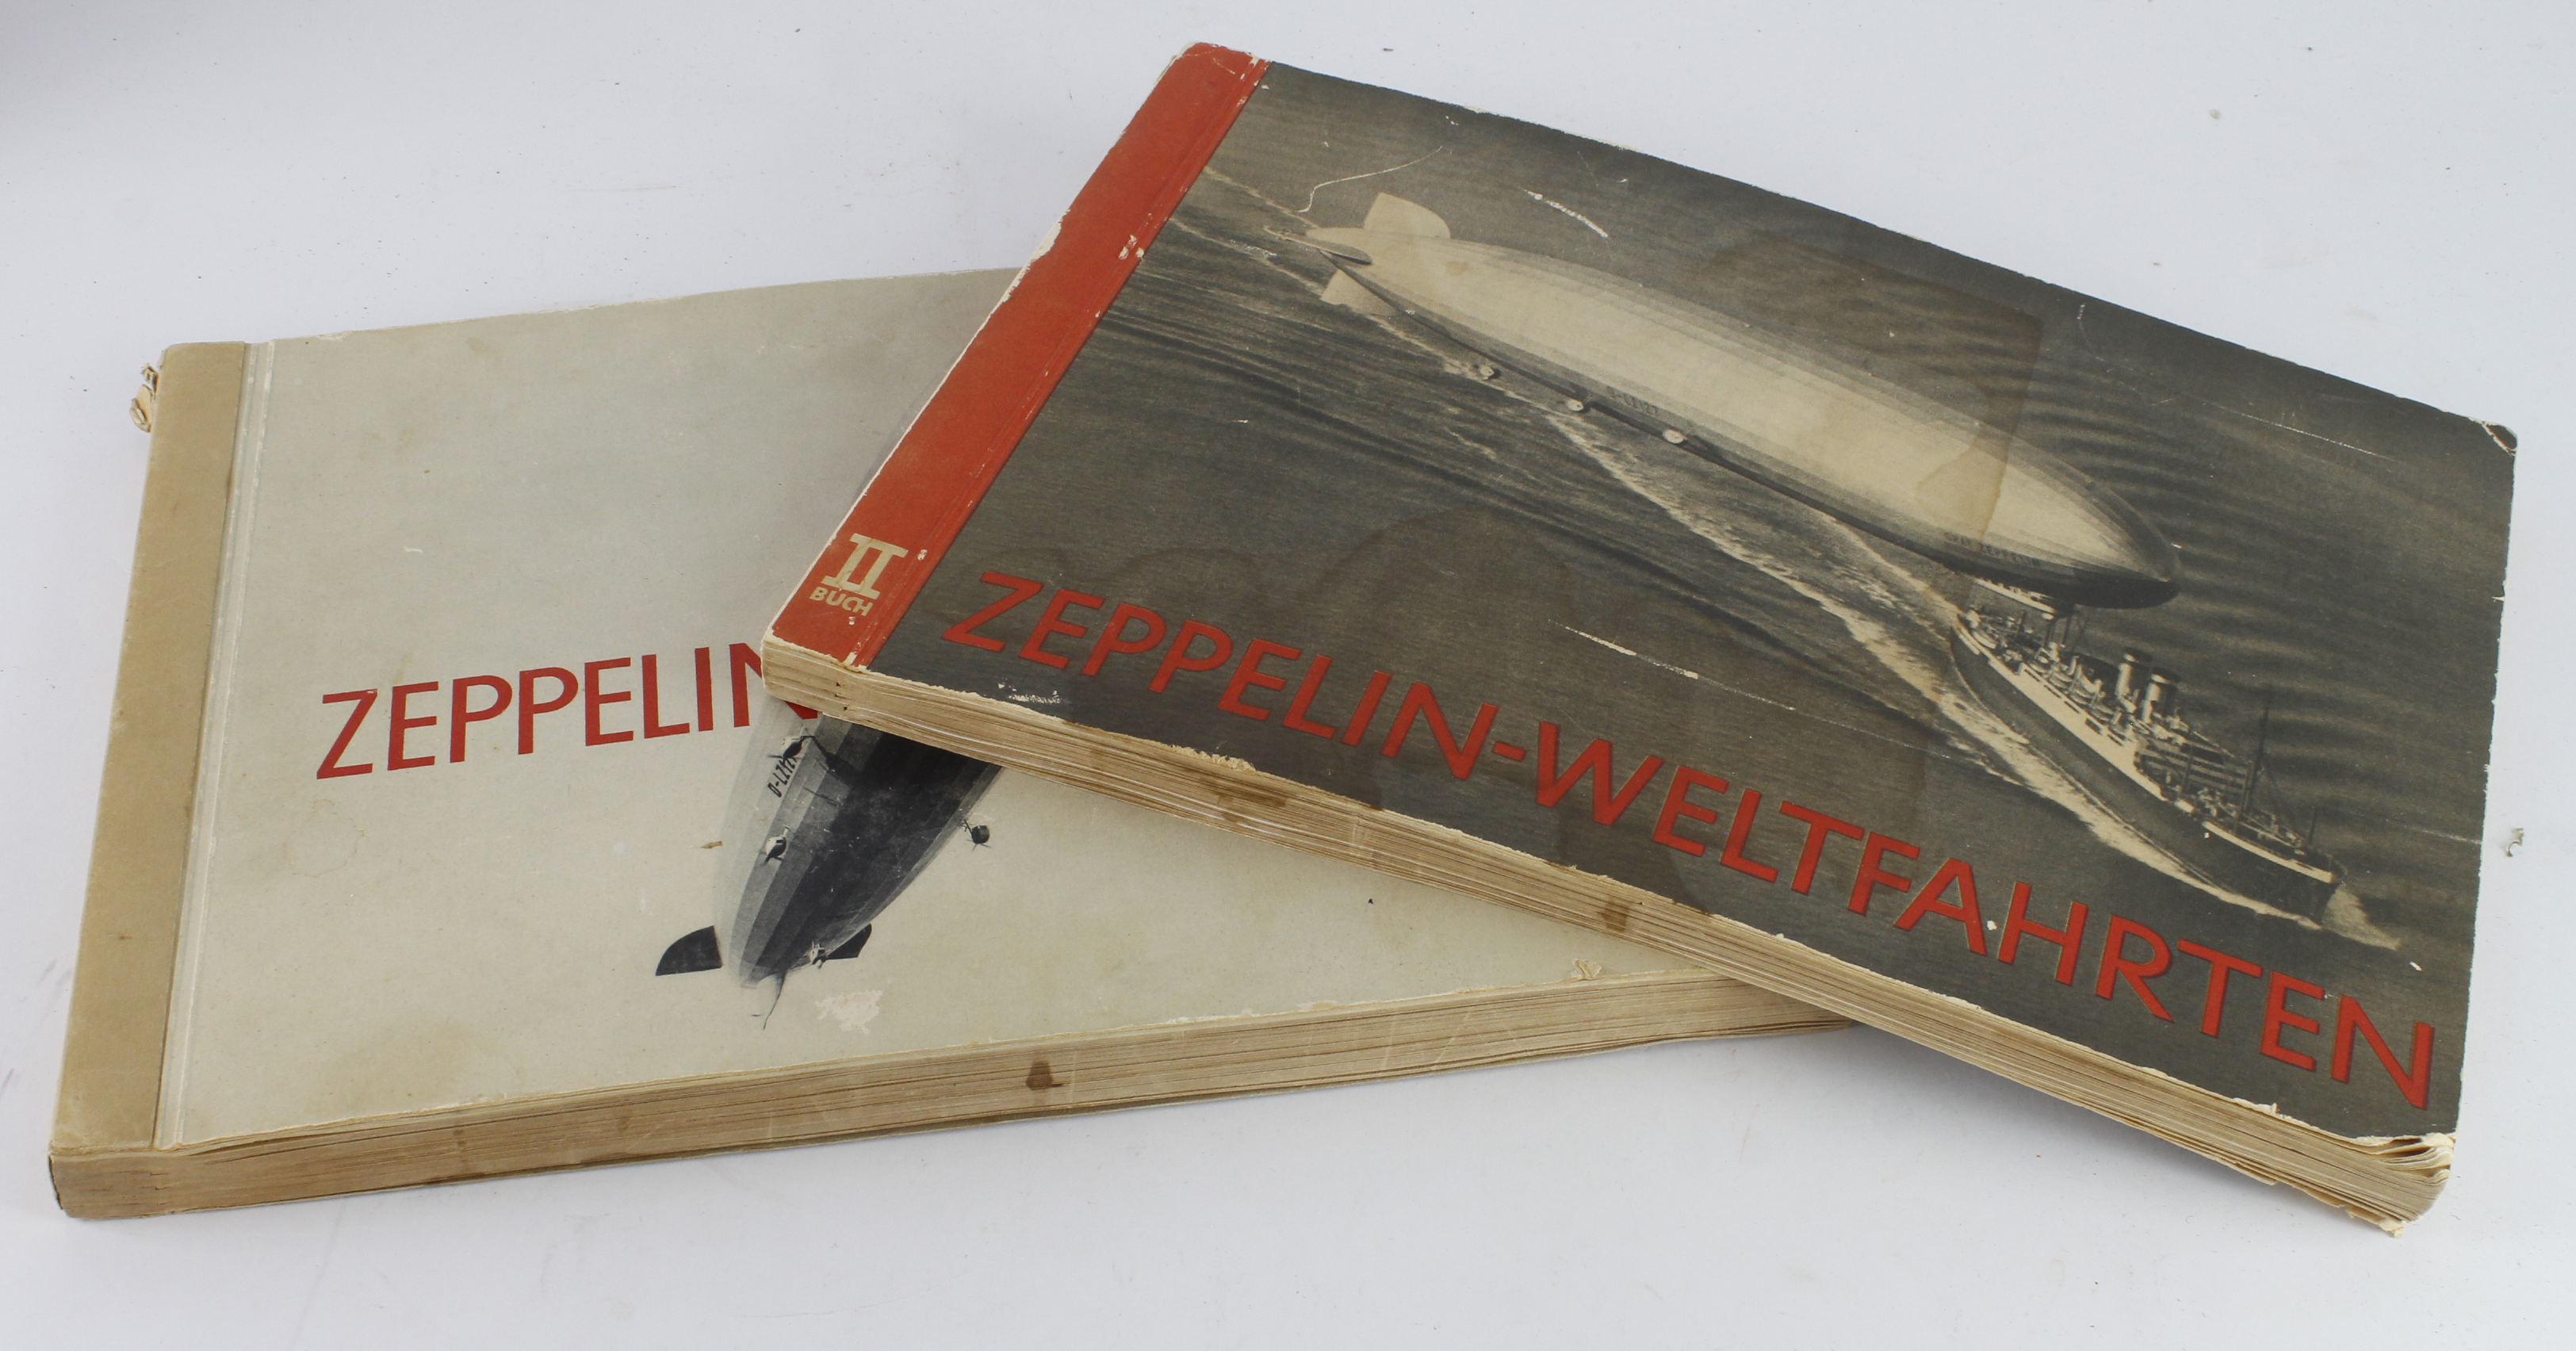 Zeppelin World Flights (1932) Volumes 1 & 2, produced in association with Club Cigarettes and the